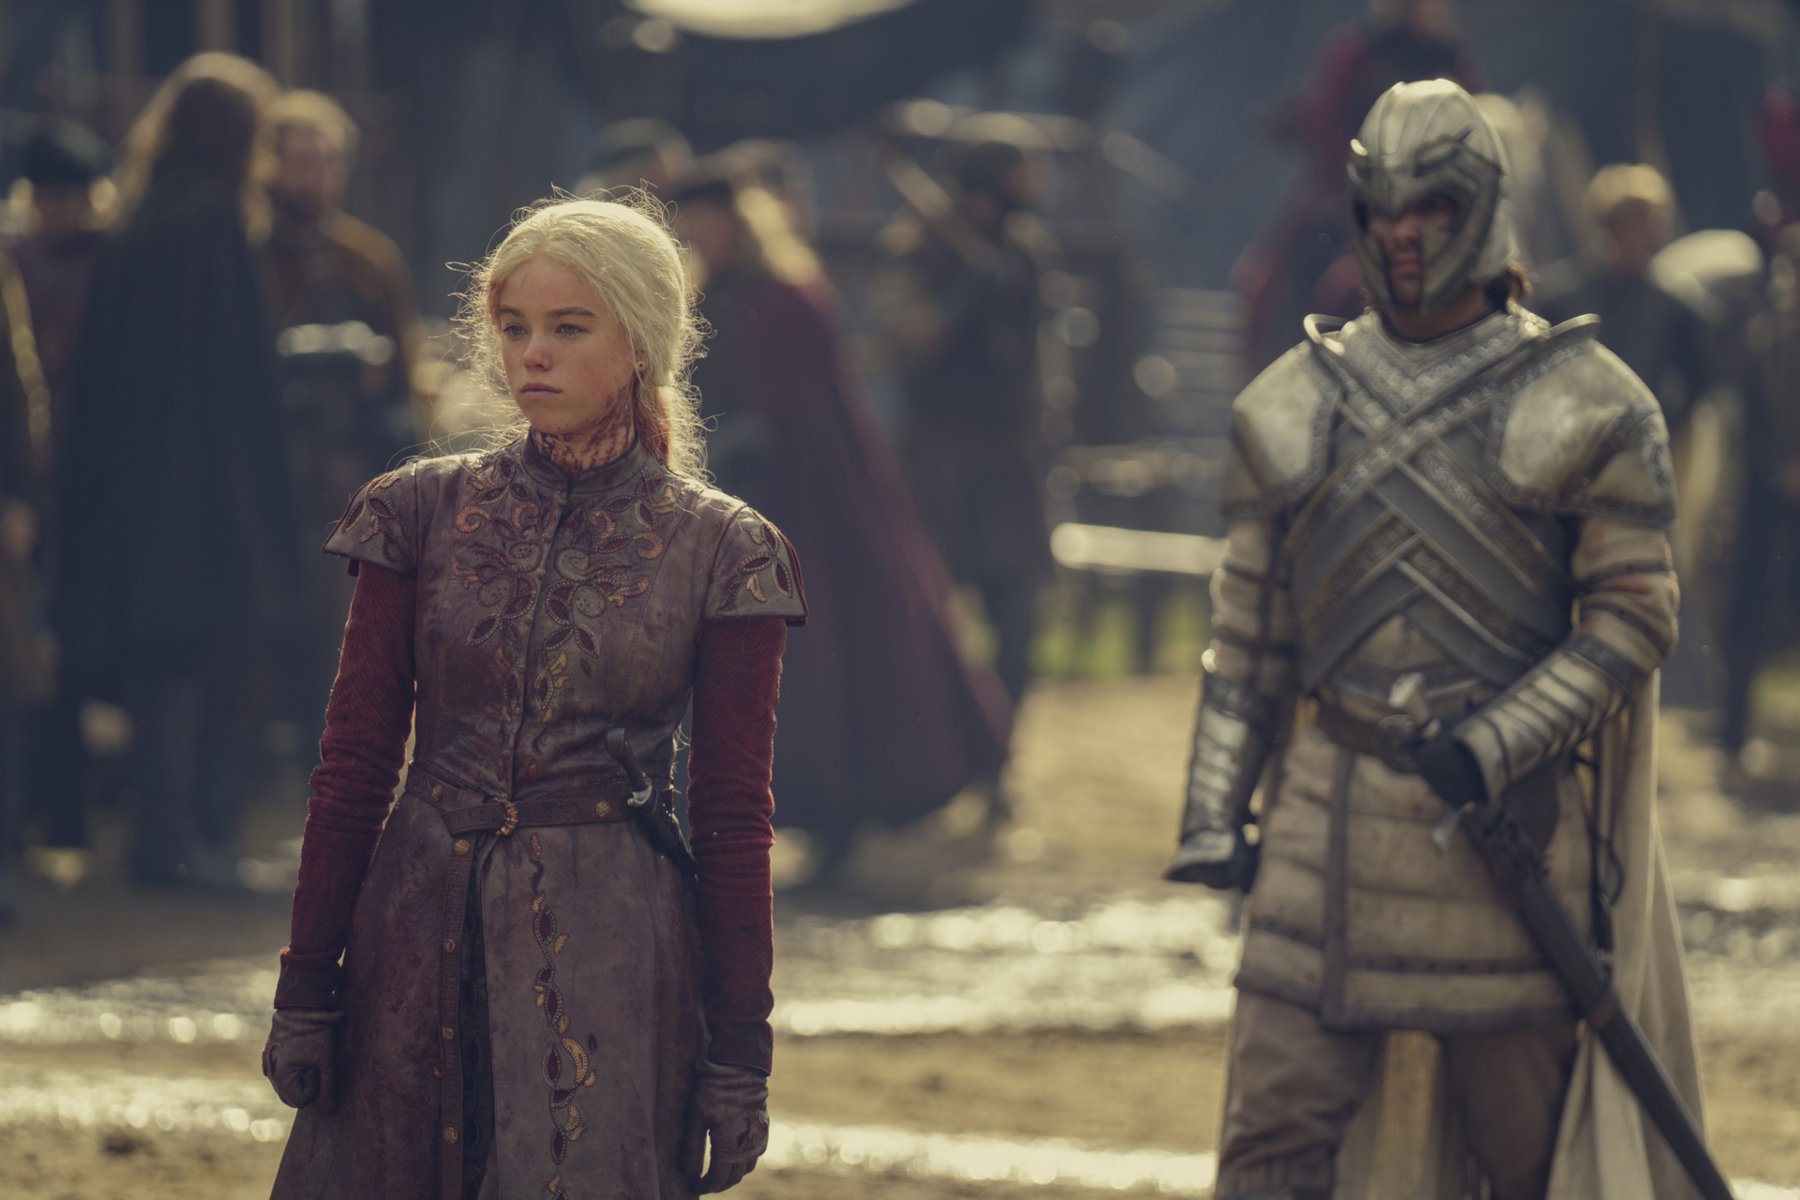 Milly Alcock and Fabien Frankel as Rhaenyra Targaryen and Ser Criston Cole in 'House of the Dragon' Episode 3. Rhaenyra looks disheveled and covered in blood, and Cristen Cole is wearing his armor.